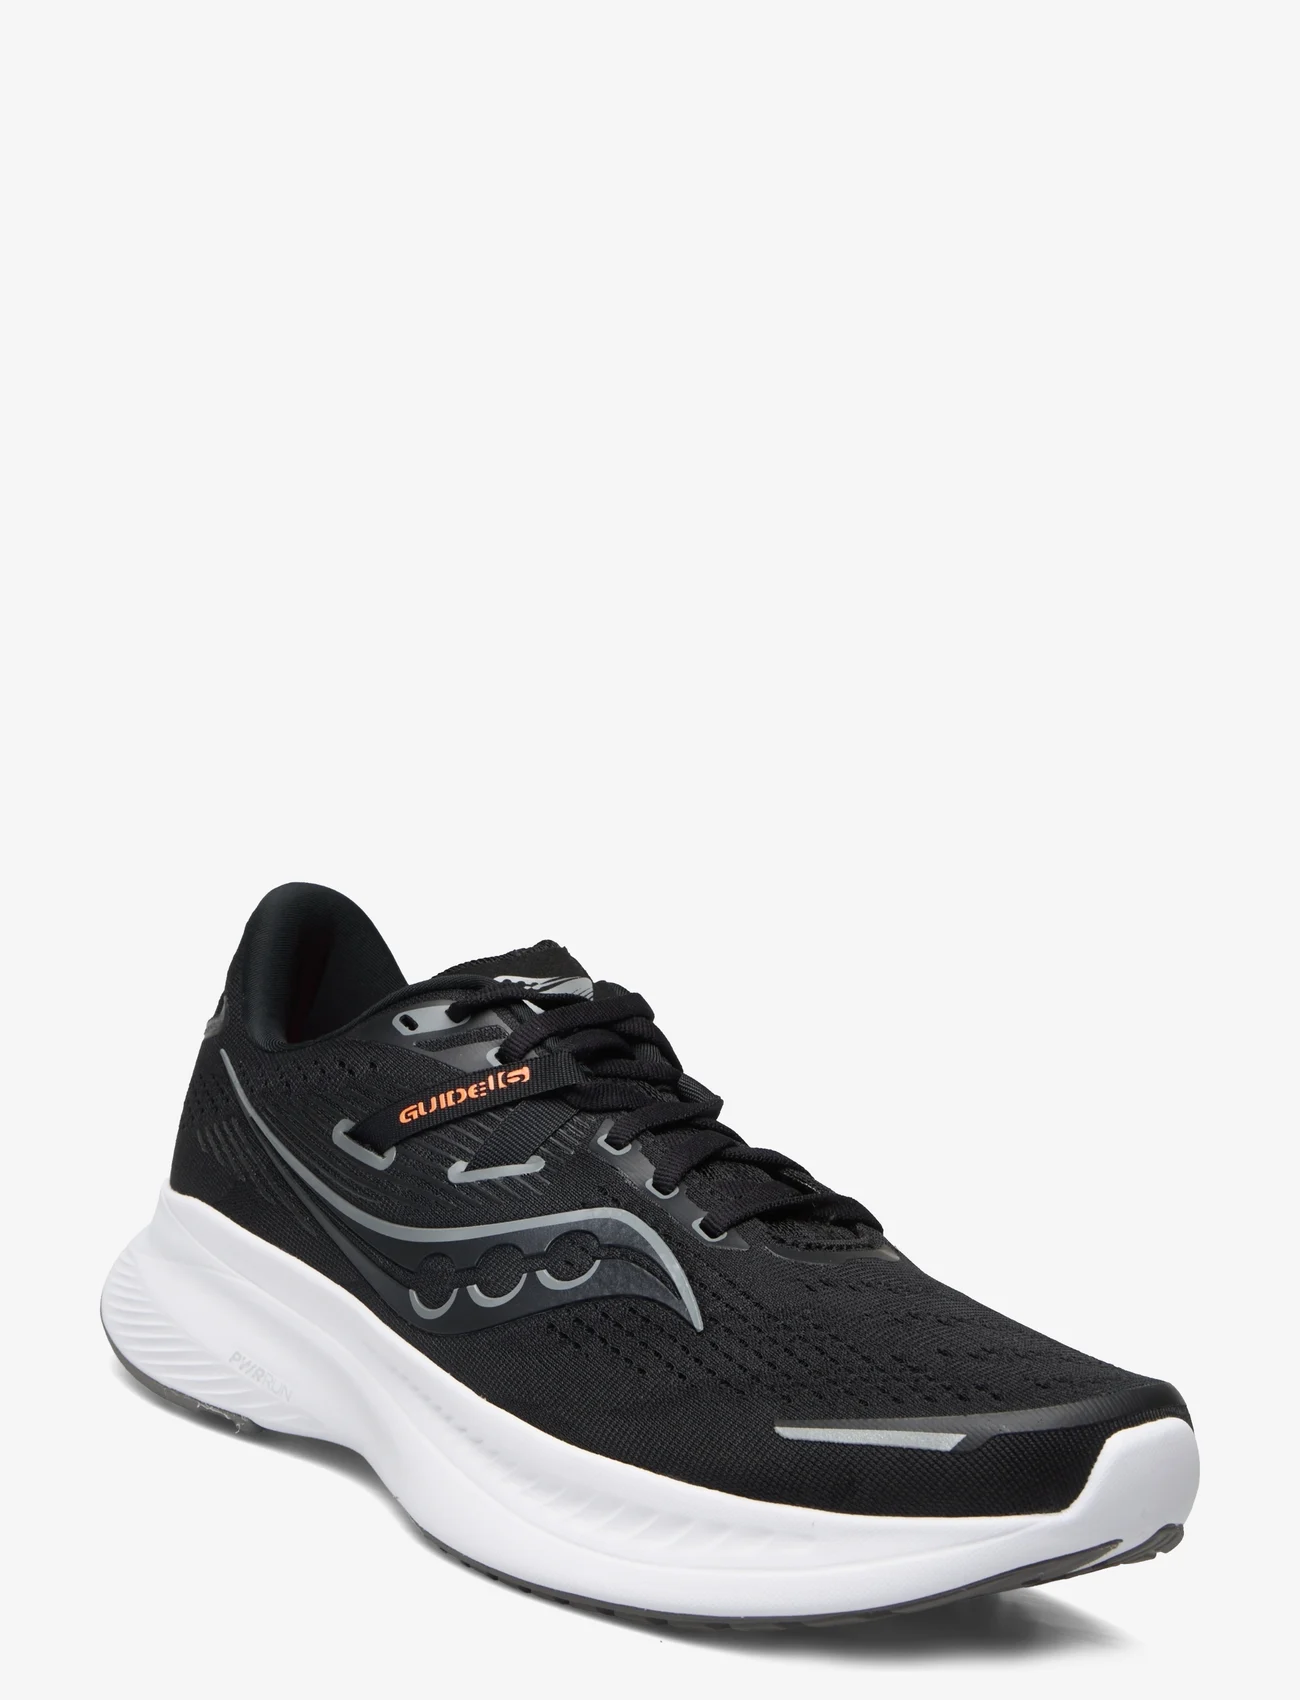 Saucony - GUIDE 16 - running shoes - black/white - 0